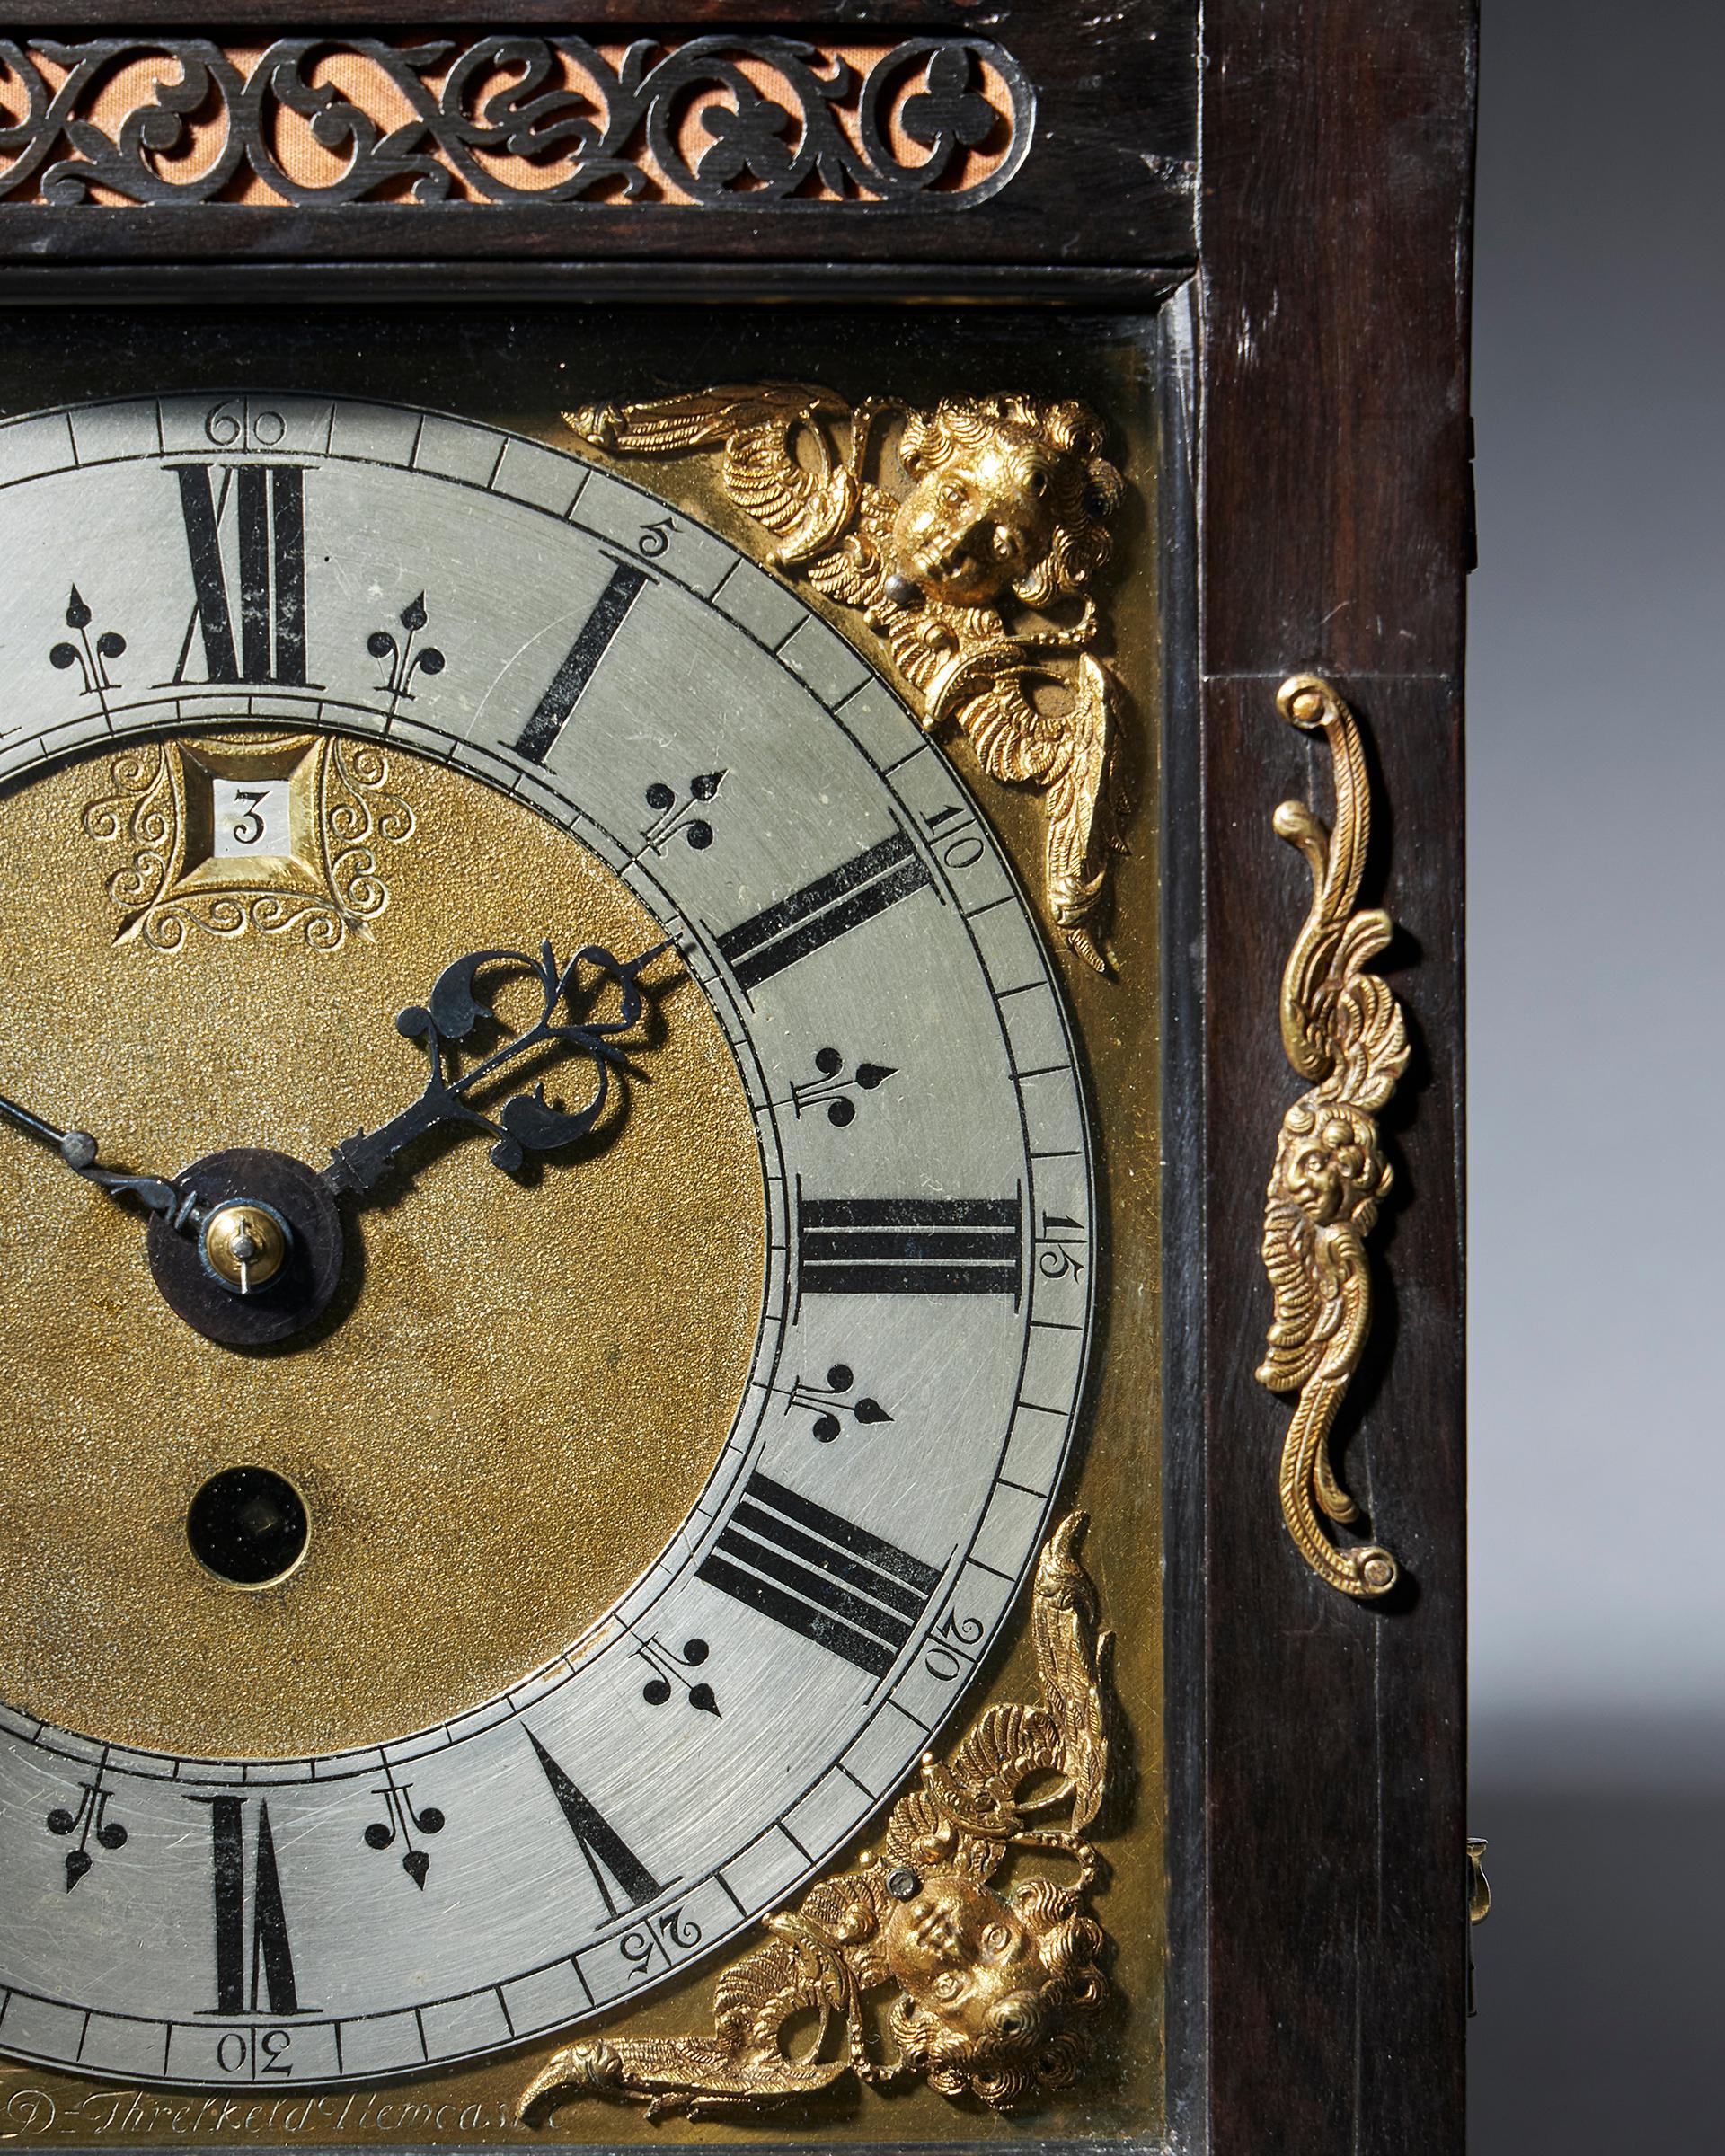 Fruitwood Fine 17th Century Charles II Spring Driven Table Clock by Deodatus Threlkeld